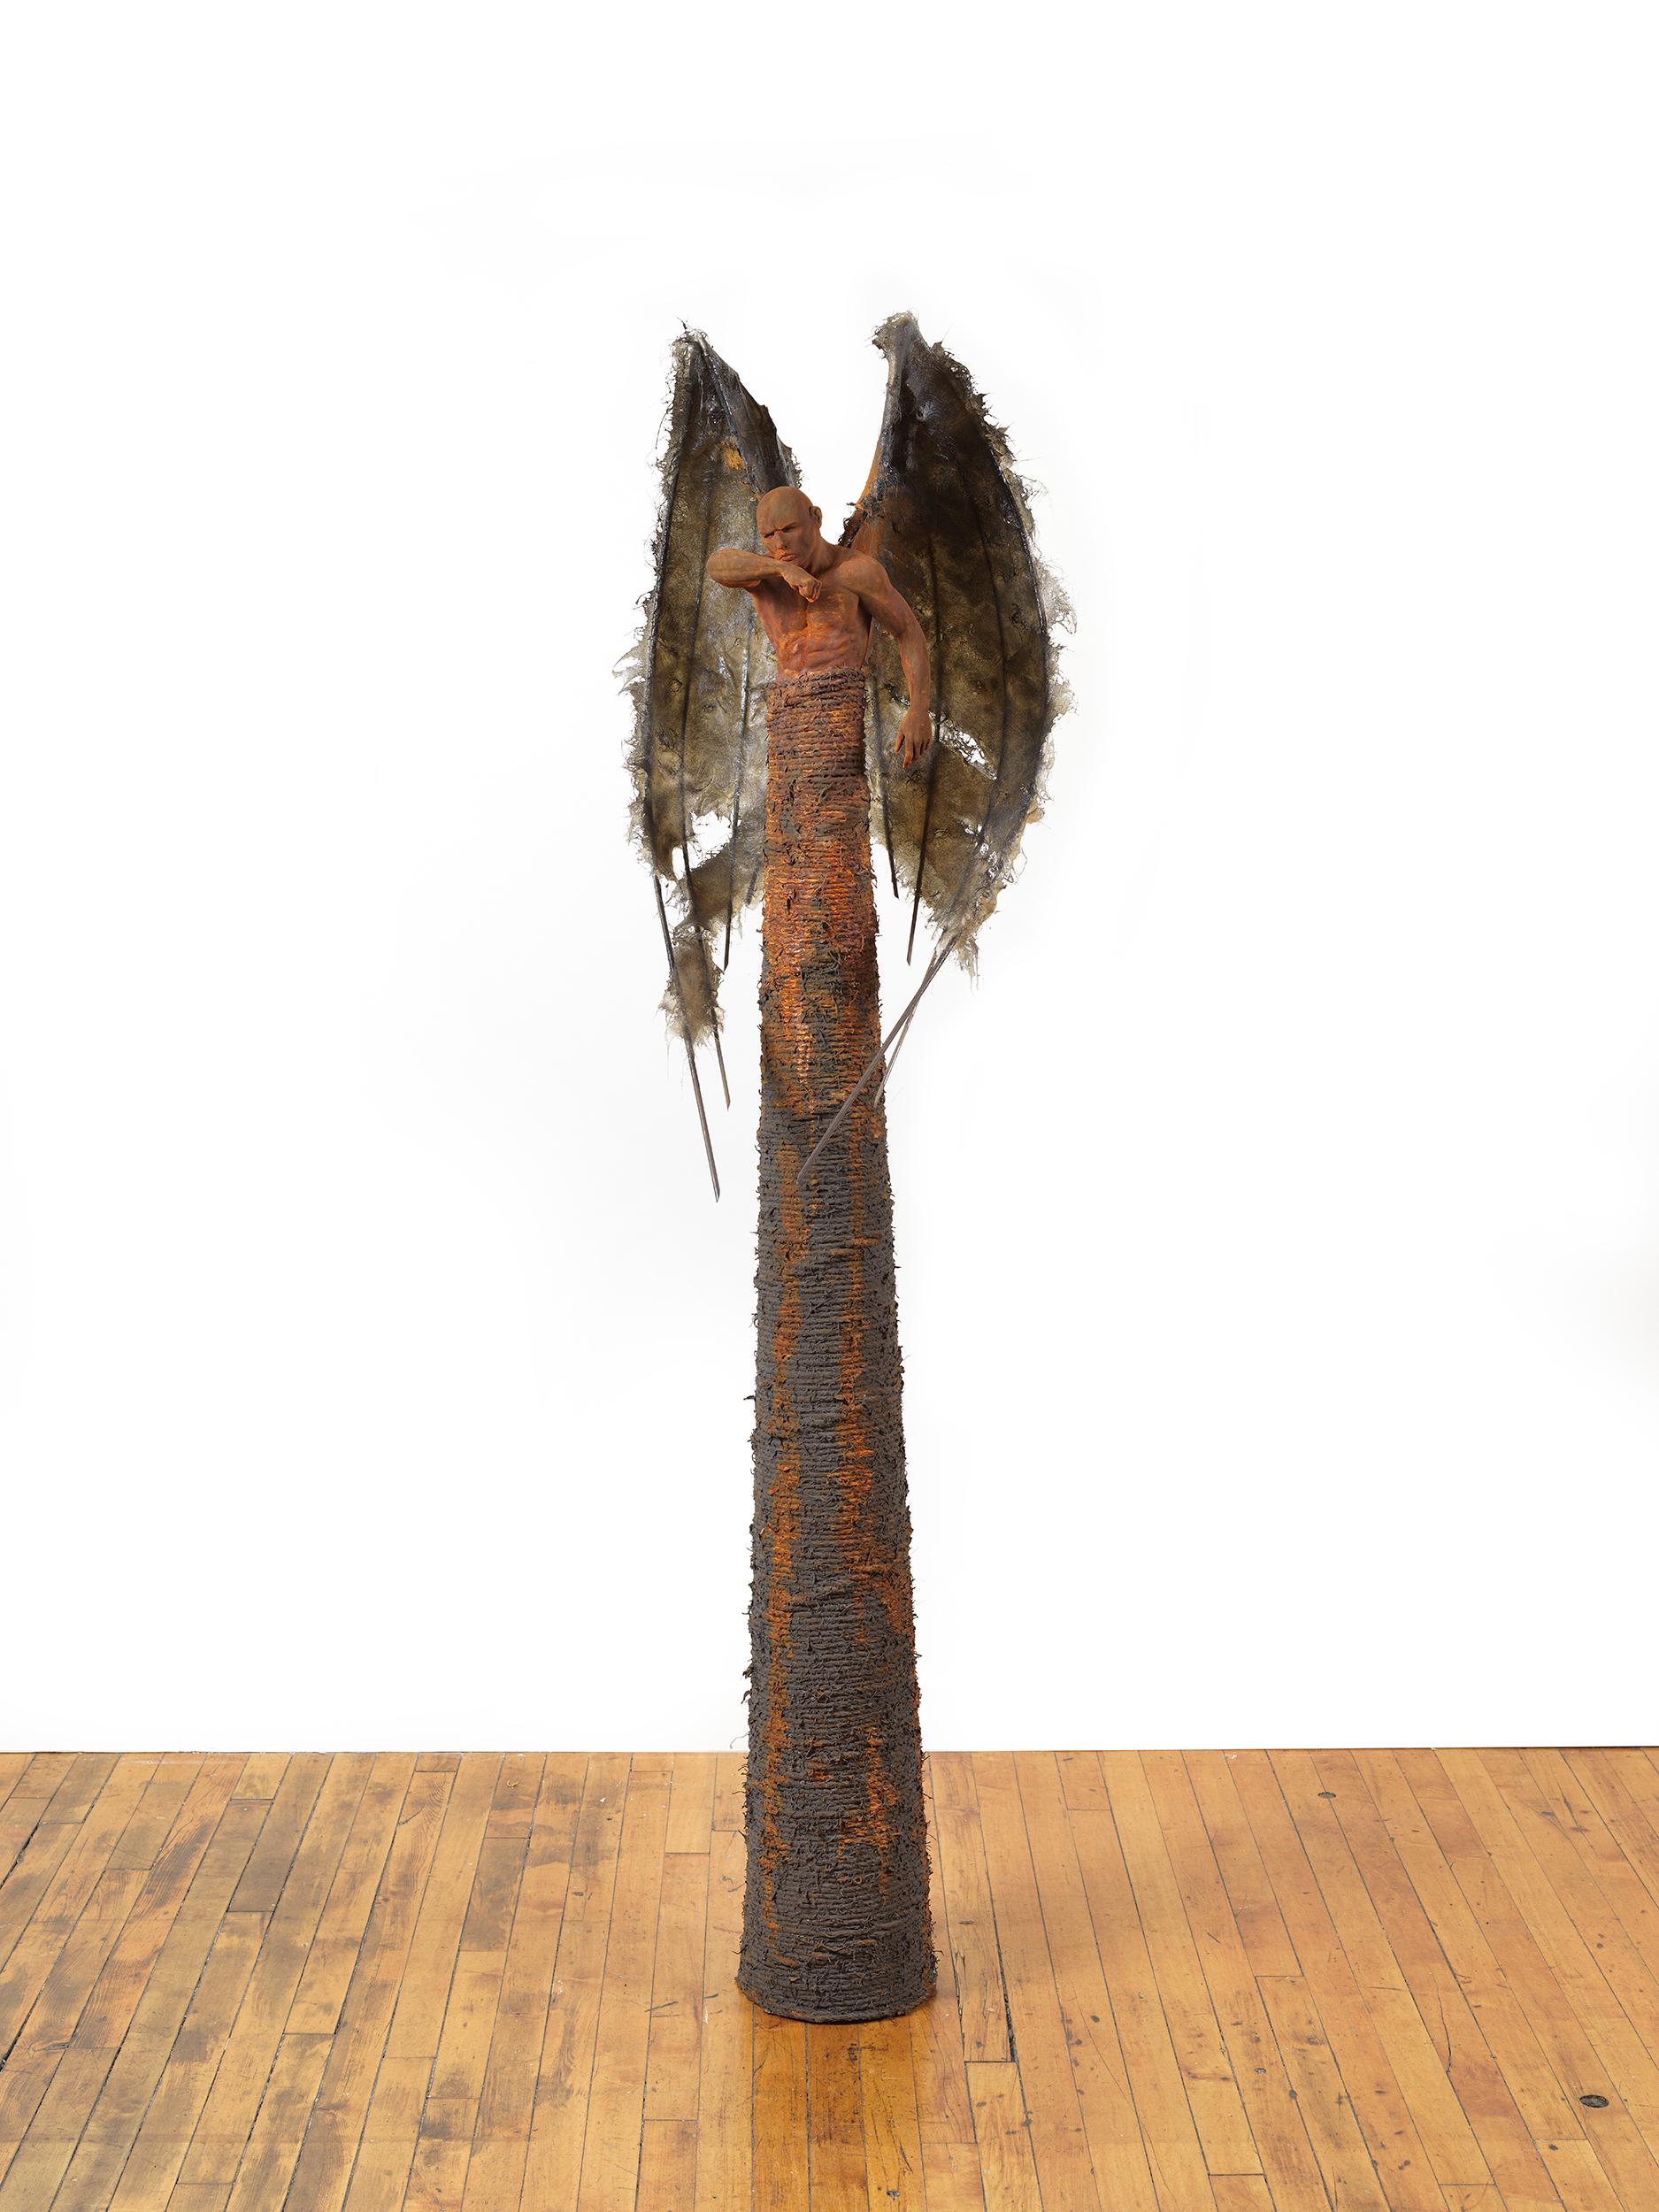 This winged cast bronze guardian figure sits atop a conical base is a pose of power and defiance, his bat-like wings made of fiberglass and steel envelop and protect him .  The sculpture is patinaed with iron and rust.  The combination of materials